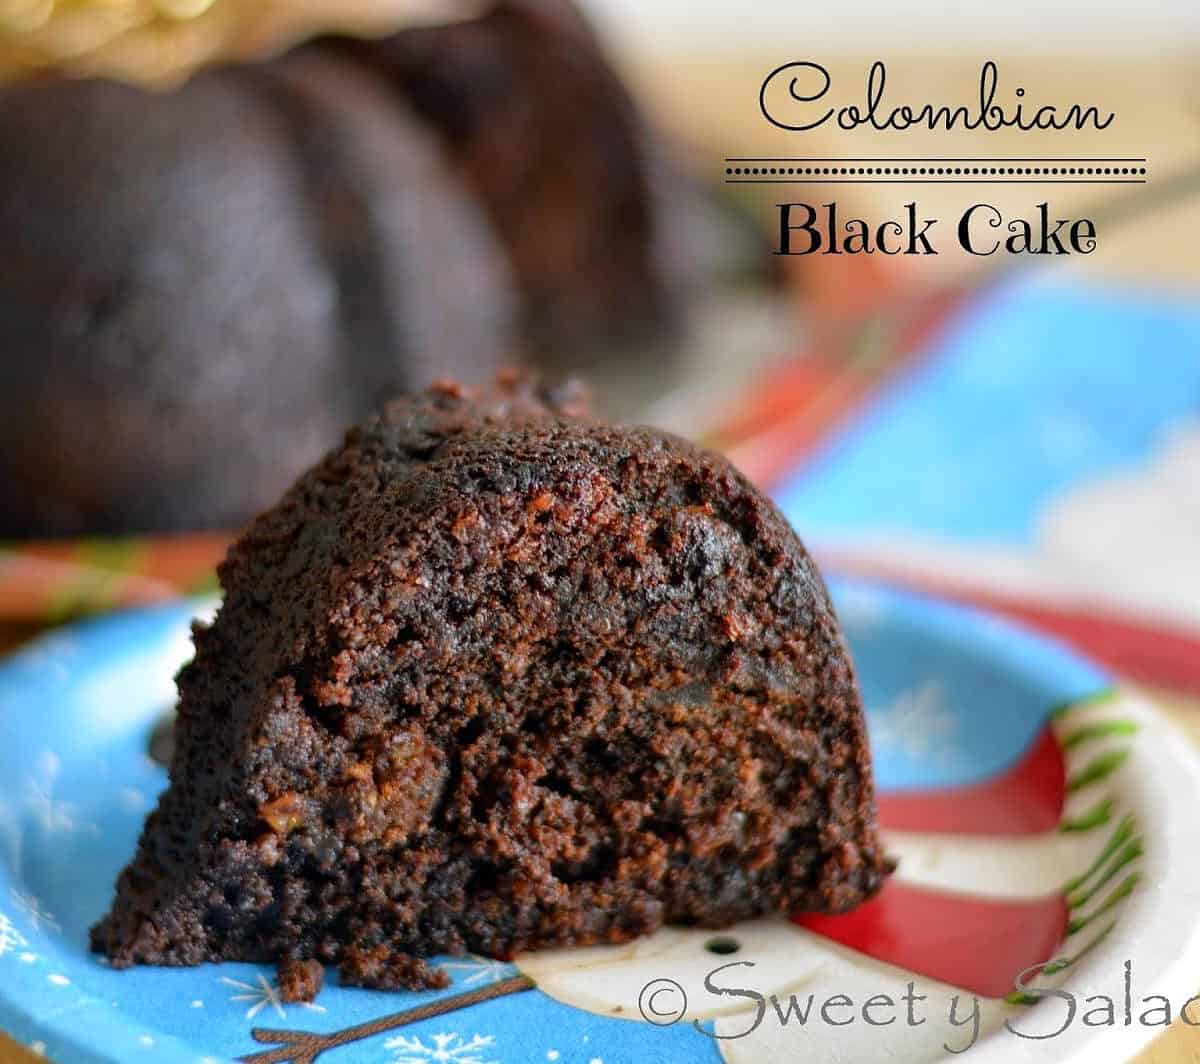  The combination of dark rum and chocolate in this cake is irresistible.